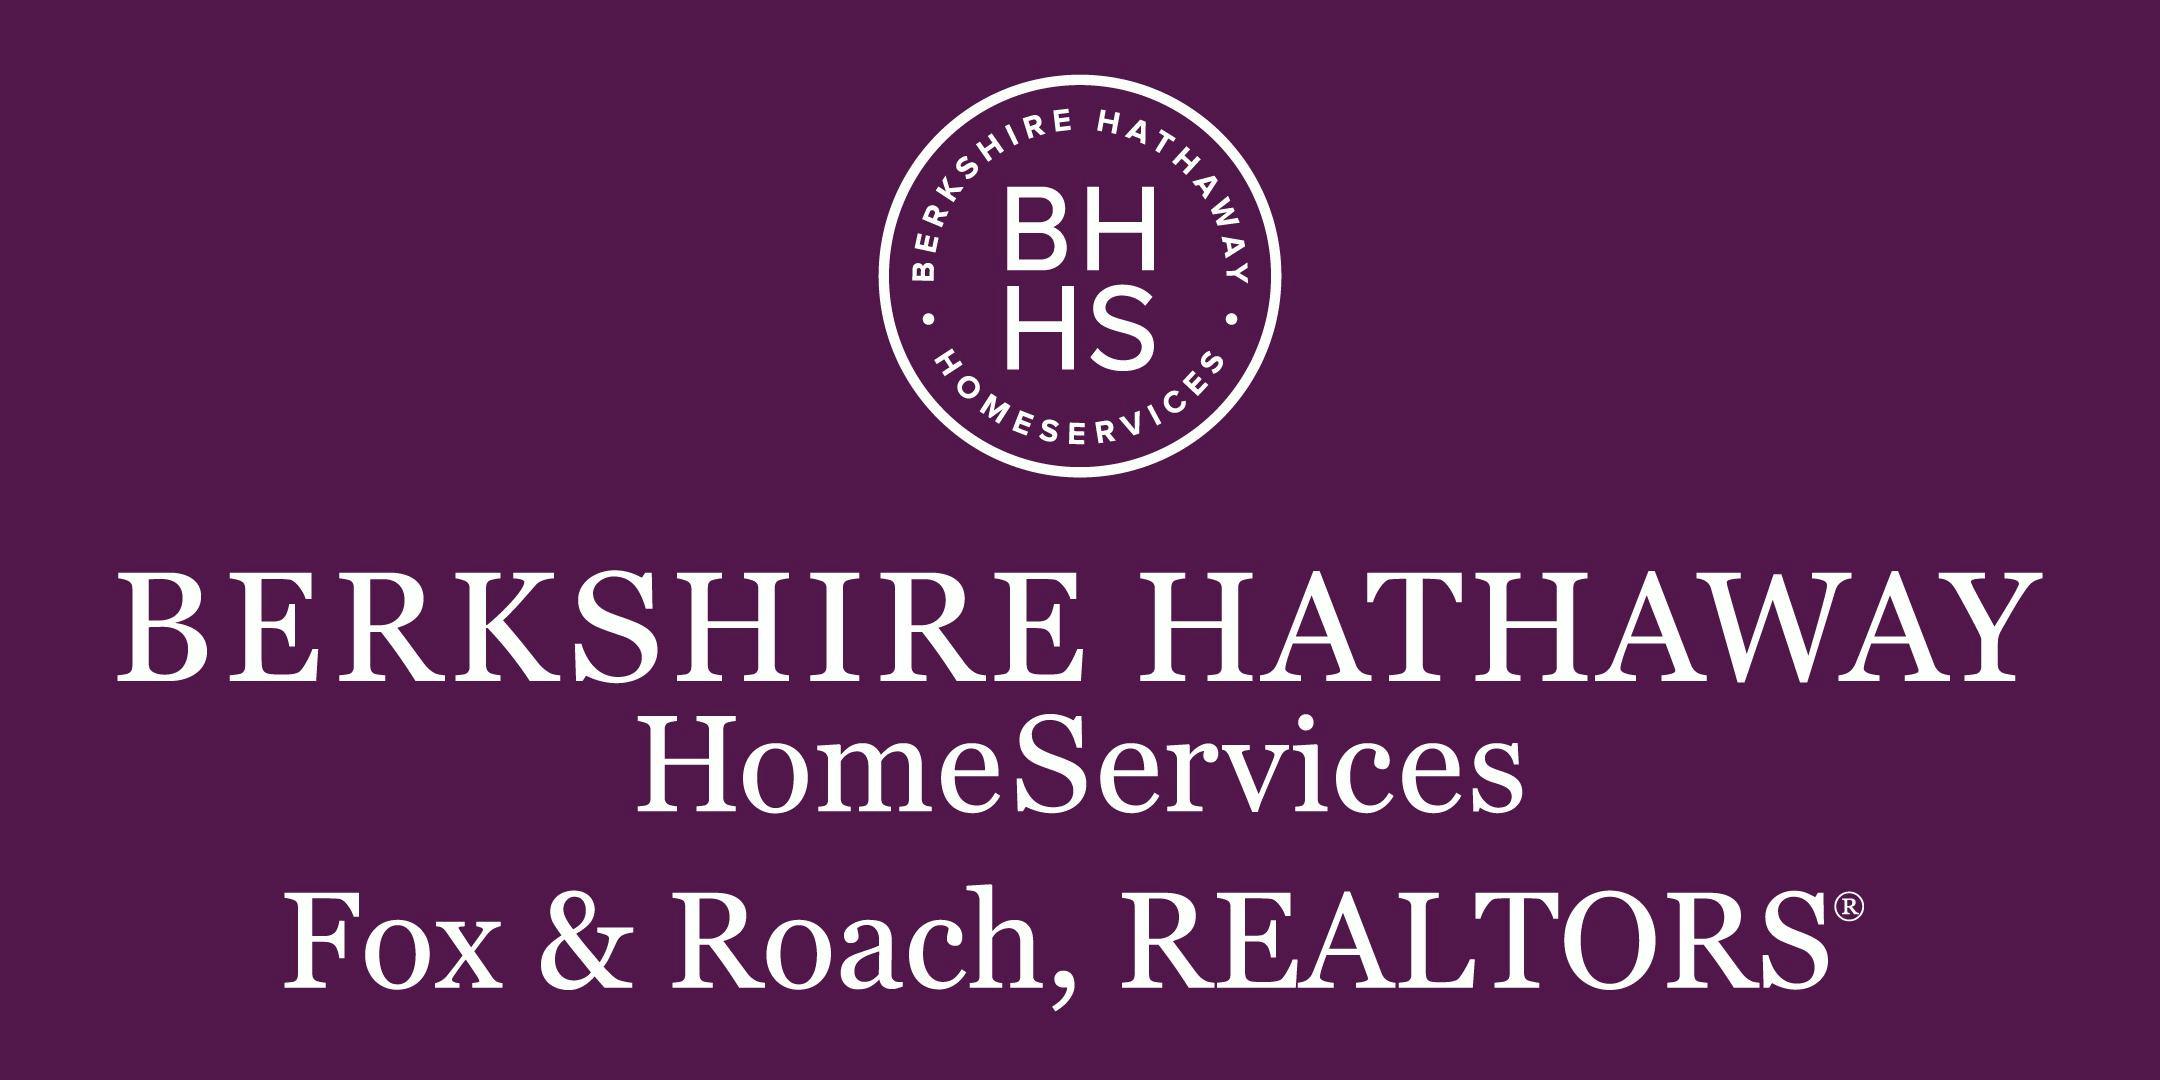 BEST New Agent Training, BHHS F&R Allentown, Monday and Tuesday afternoons